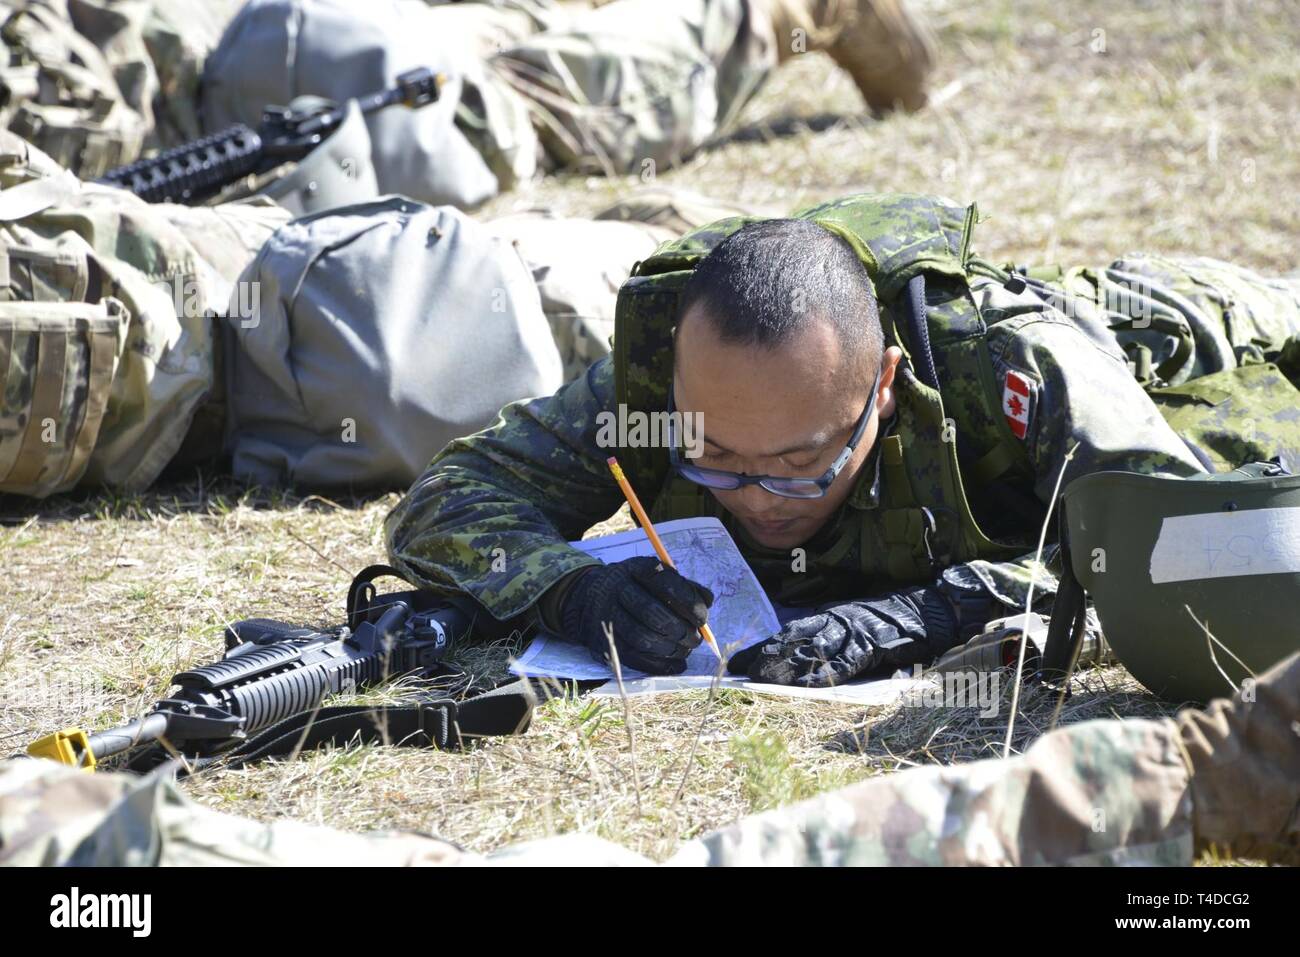 A Canadian soldier plots map coordinates during the land navigation portion of testing for the Expert Field Medical Badge at the 7th Army Training Command’s Grafenwoehr Training Area, Germany, March 22, 2019. To qualify for the badge, Soldiers from U.S. Army Europe, NATO, and other allied partners must complete events such as land navigation, weapons function checks, written tests, medical treatments and evacuations, and a 12 mile ruck march. (U. S. Army Stock Photo